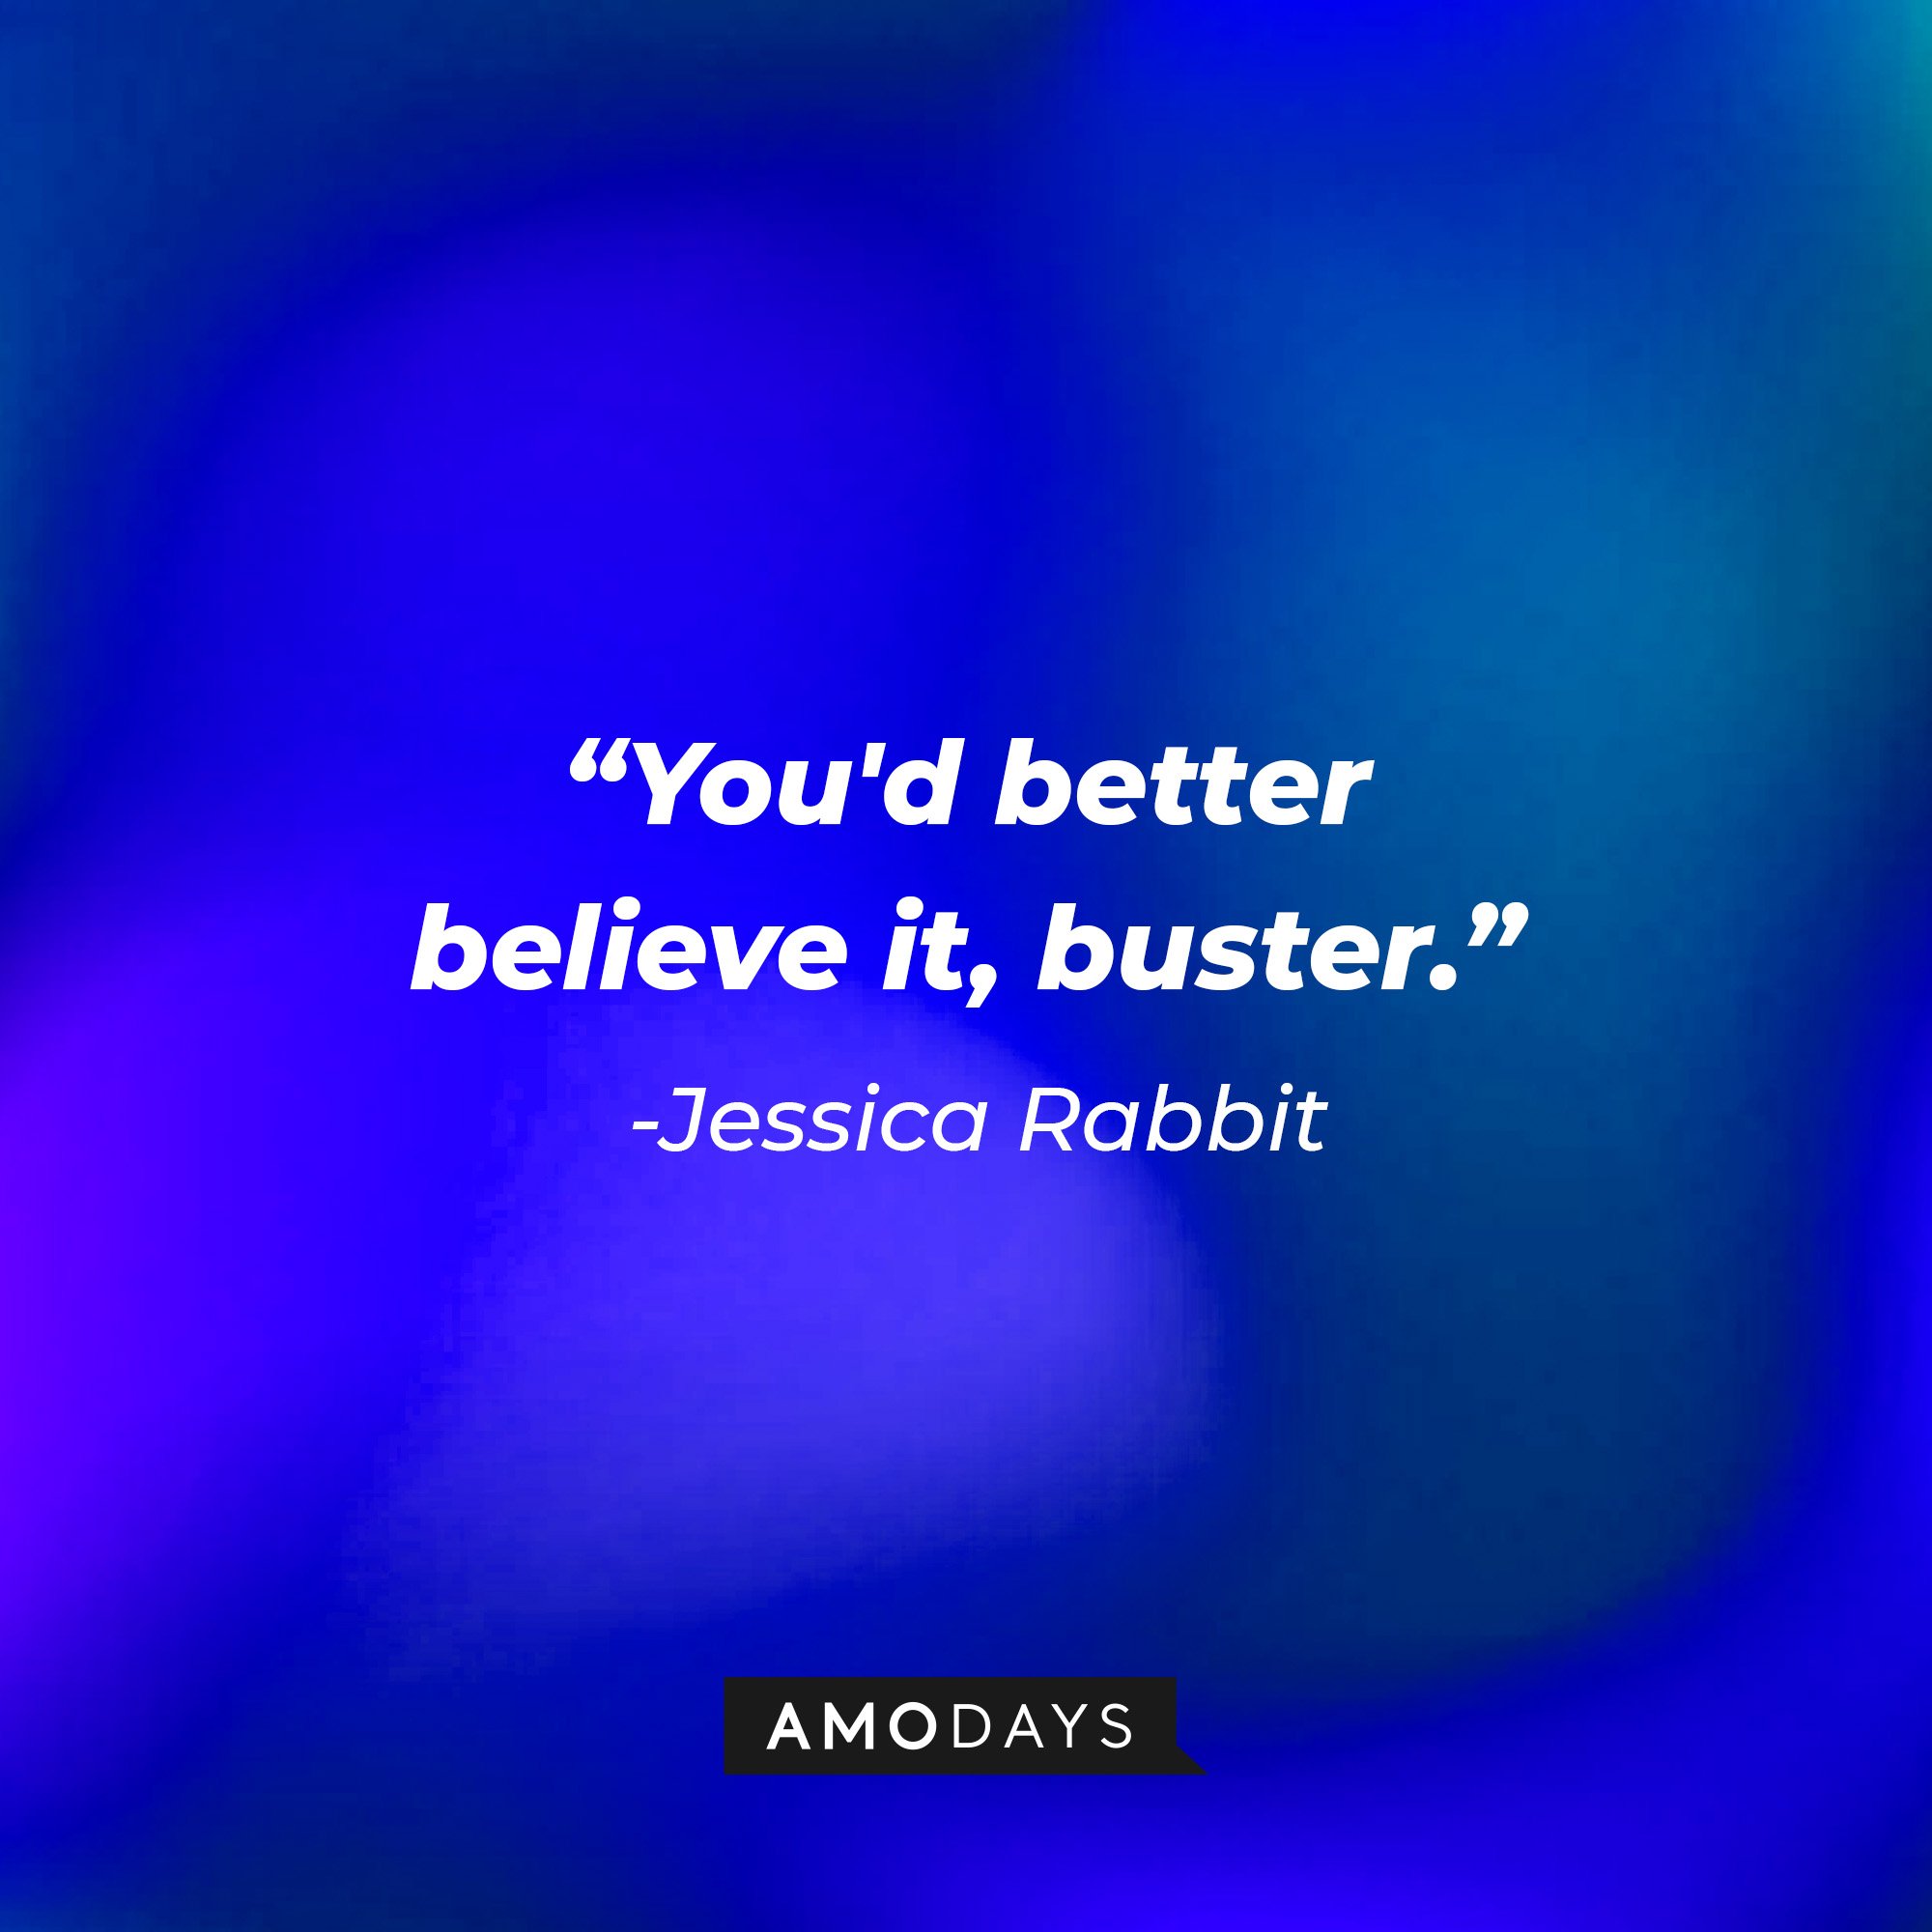 Jessica Rabbit’s quote: "You'd better believe it, buster." | Image: AmoDays